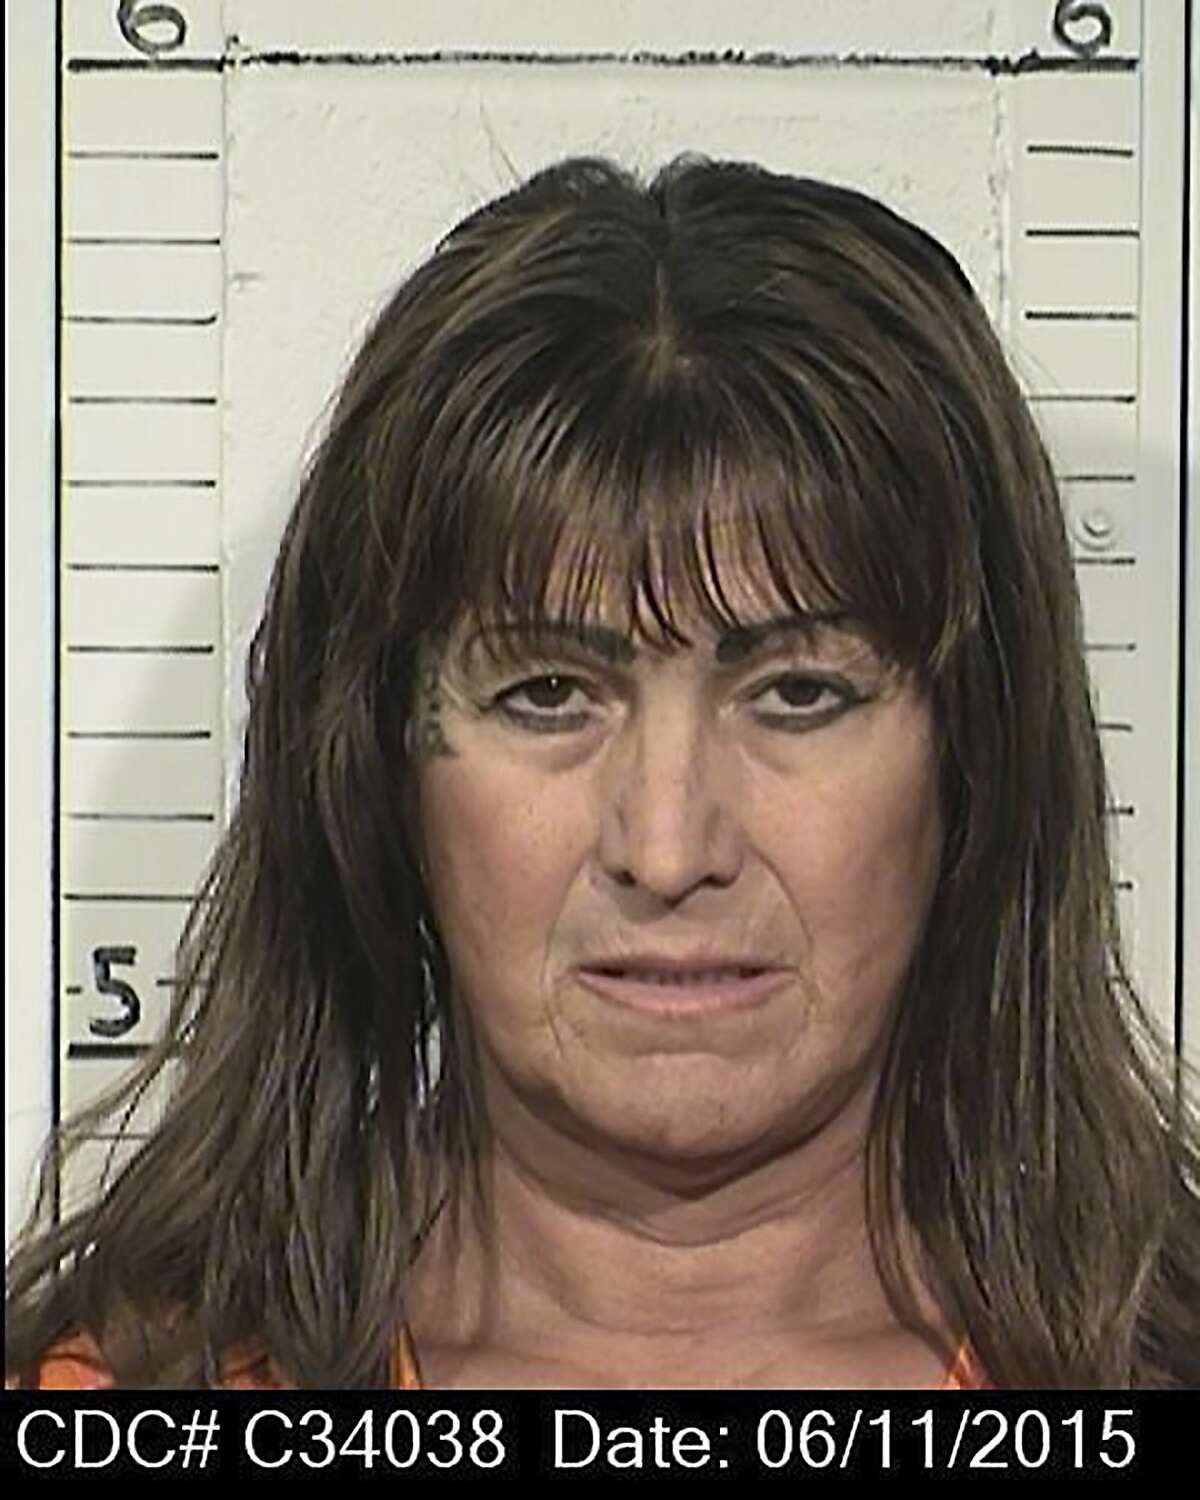 FILE - This June 11, 2015, file photo provided by the California Department of Corrections and Rehabilitation shows Shiloh Heavenly Quine. The 57-year-old convicted killer has become the first U.S. inmate to receive state-funded sex reassignment surgery. Shiloh Heavenly Quine has been living as a woman in a California men's prison. The surgery was scheduled for Thursday, and her attorneys told The Associated Press on Friday, Jan. 6, 2017, that it was performed. California prison officials agreed in 2015 to pay for the surgery for Quine. (AP Photo/California Department of Corrections and Rehabilitation, File)